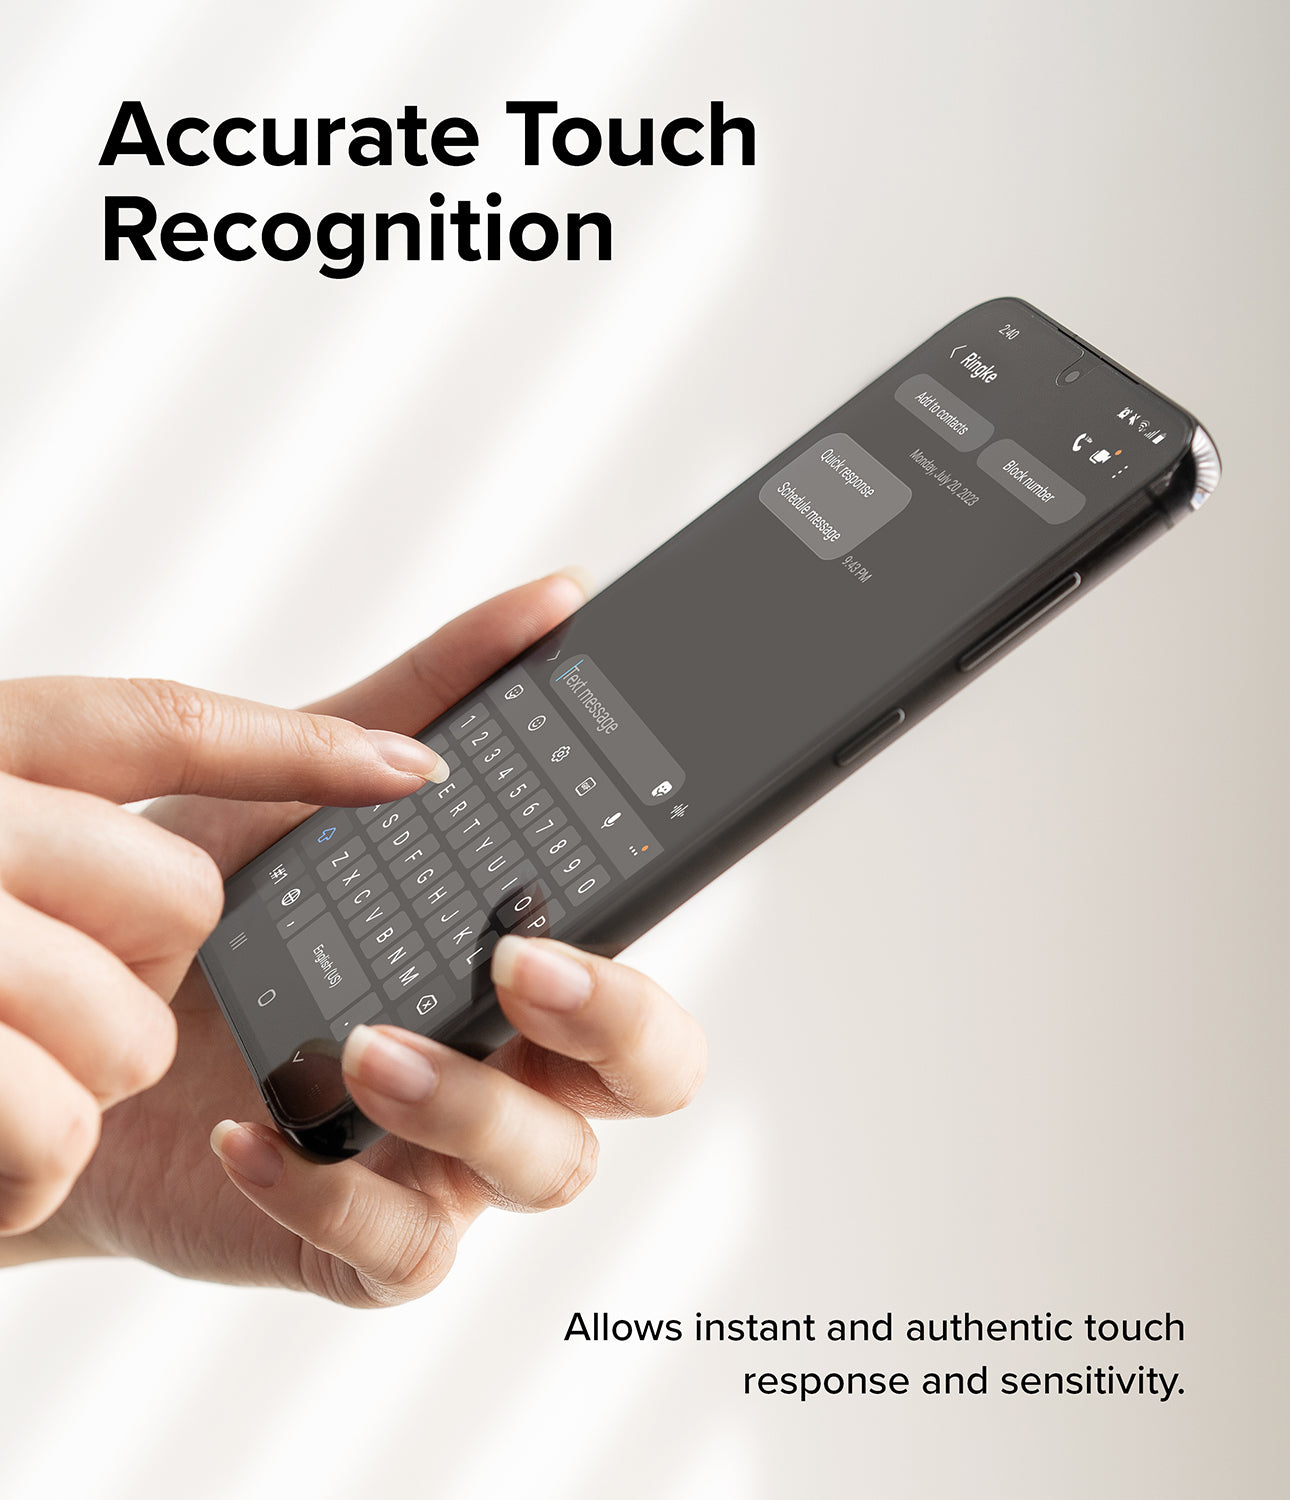 Accurate Touch Recognition